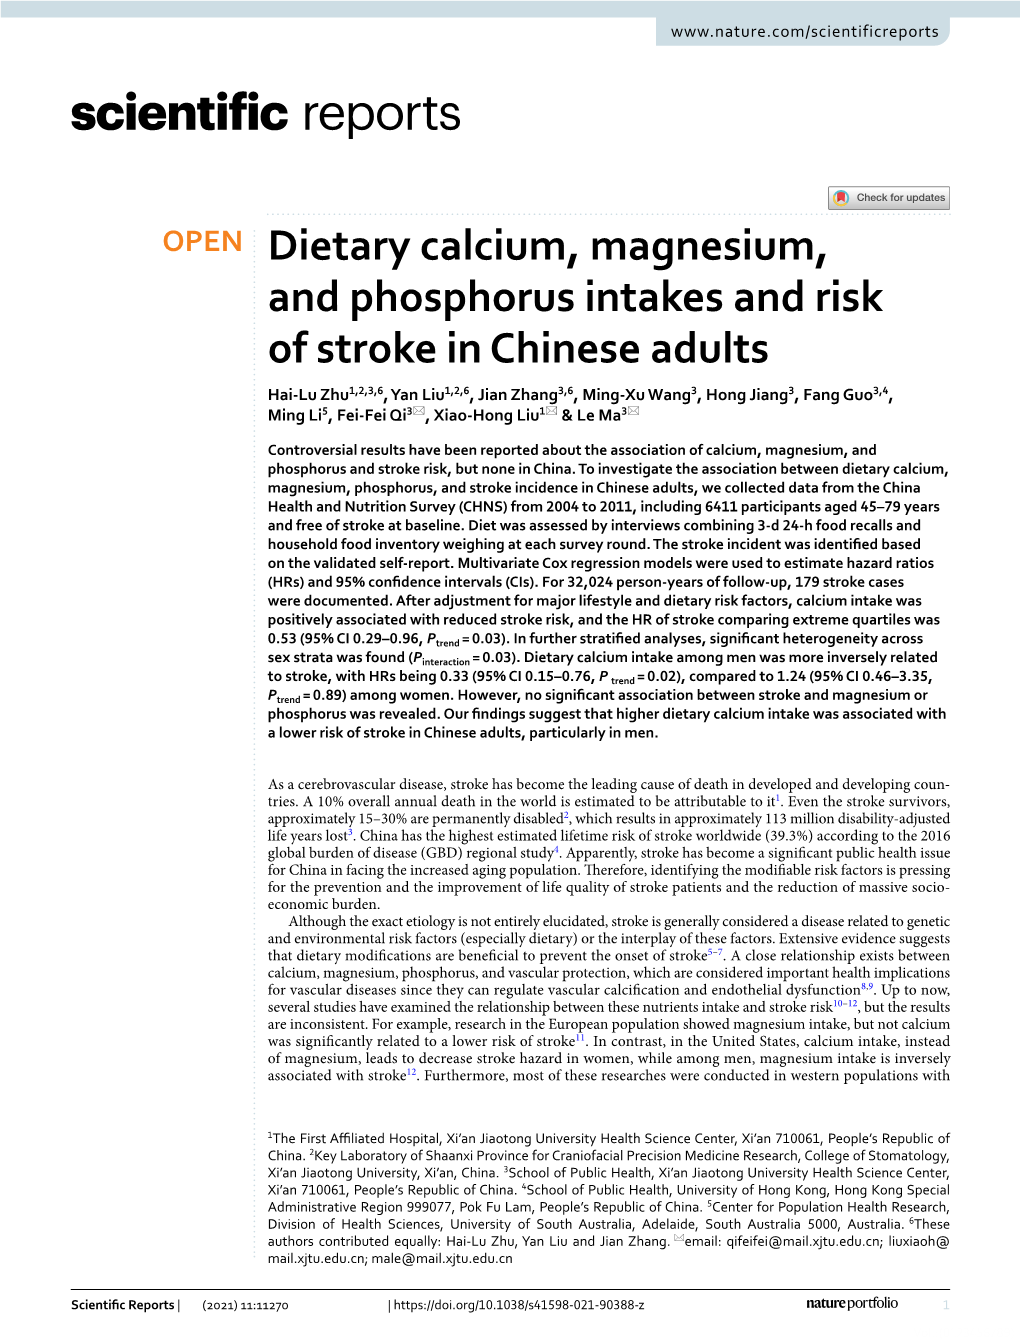 Dietary Calcium, Magnesium, and Phosphorus Intakes and Risk Of